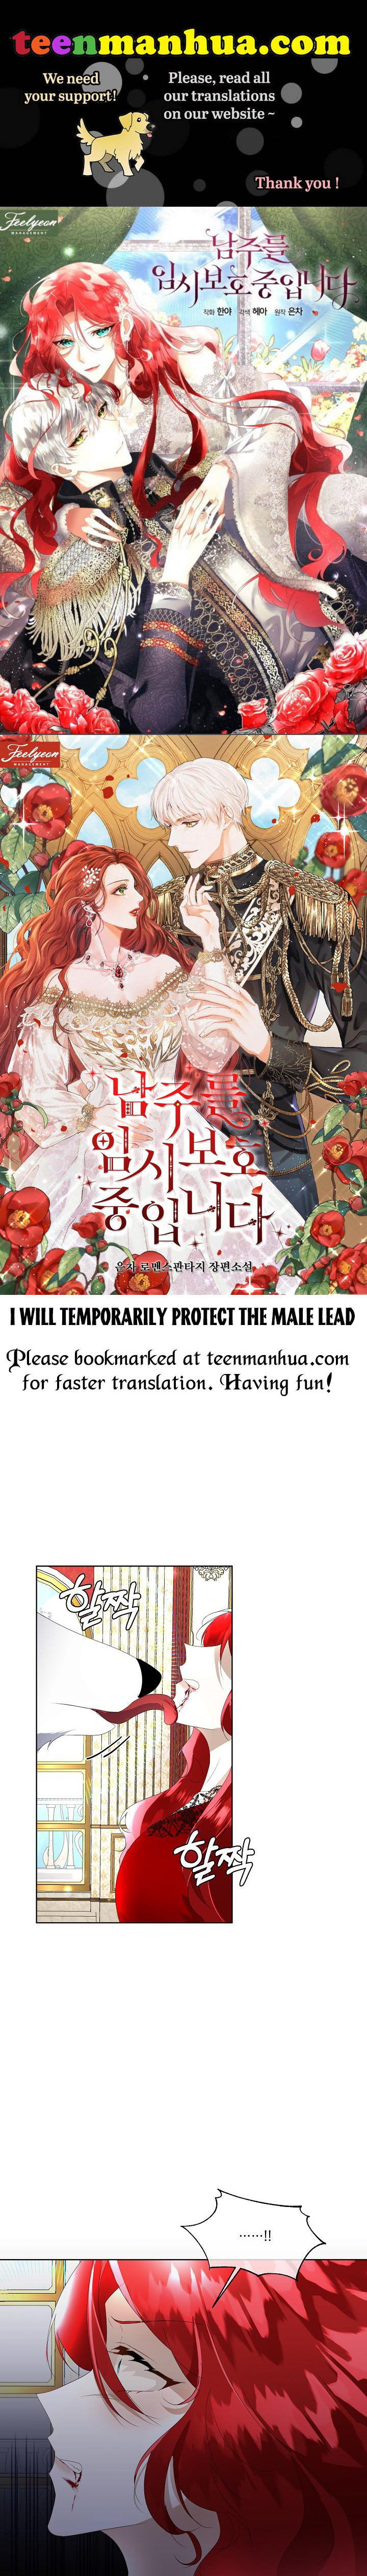 I will temporarily protect the male lead Chapter 11